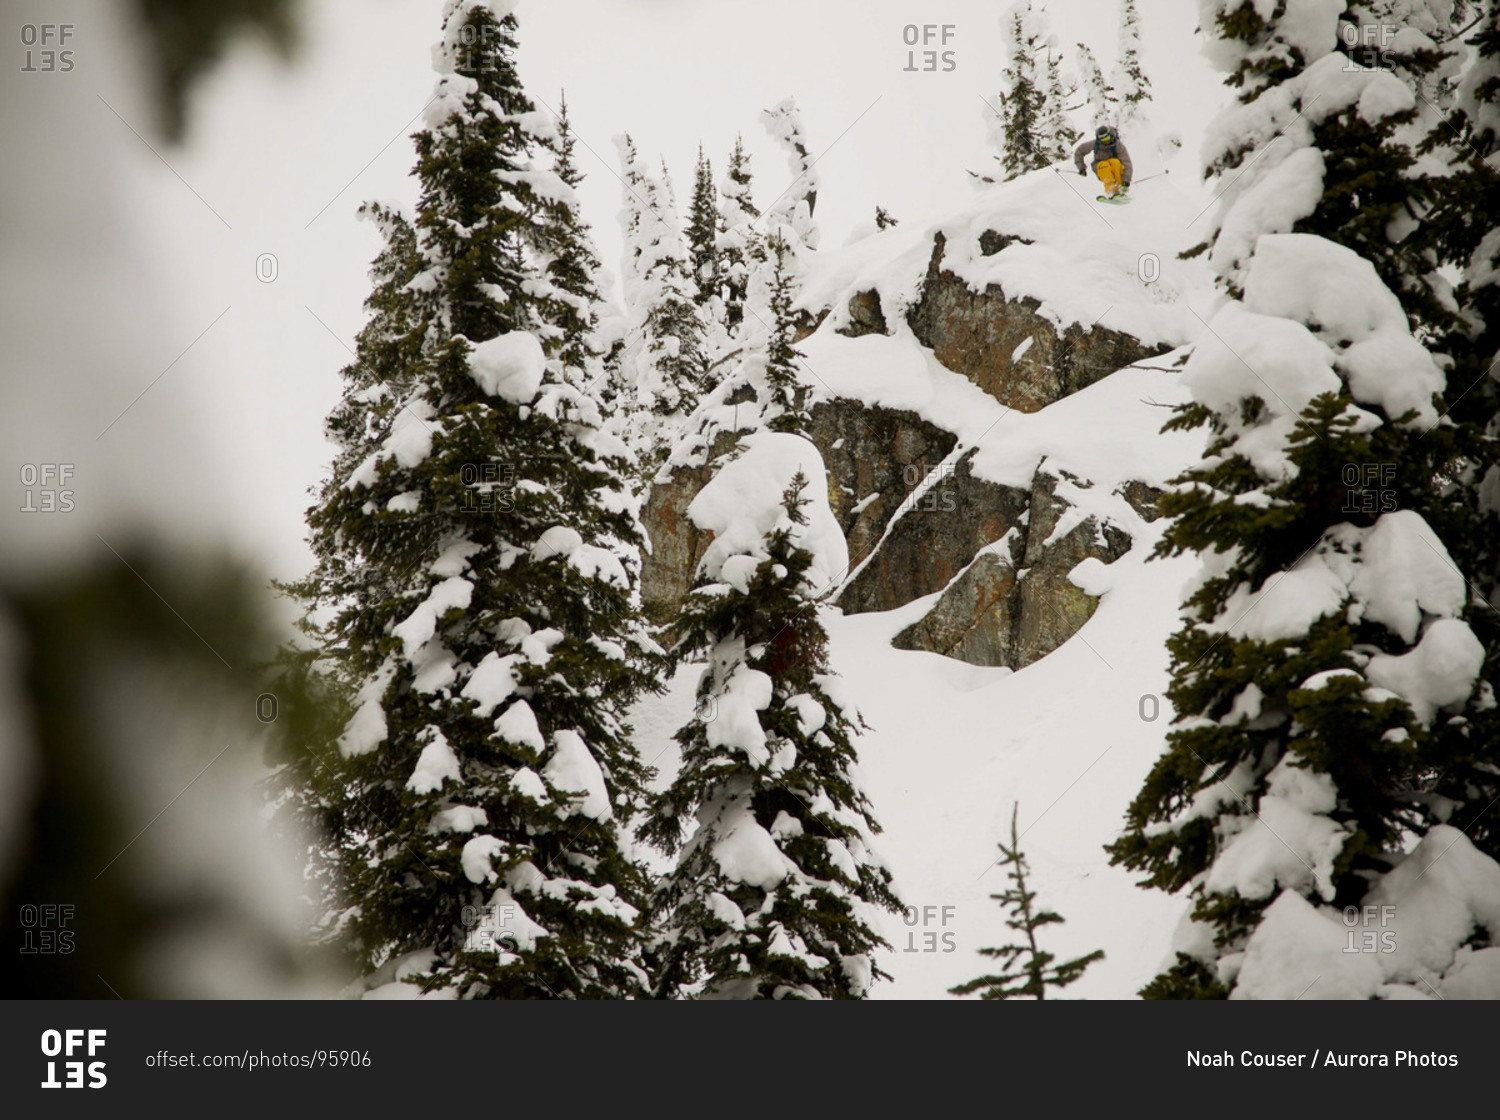 A backcountry skier drops a large cliff on a cloudy day in mid-winter.